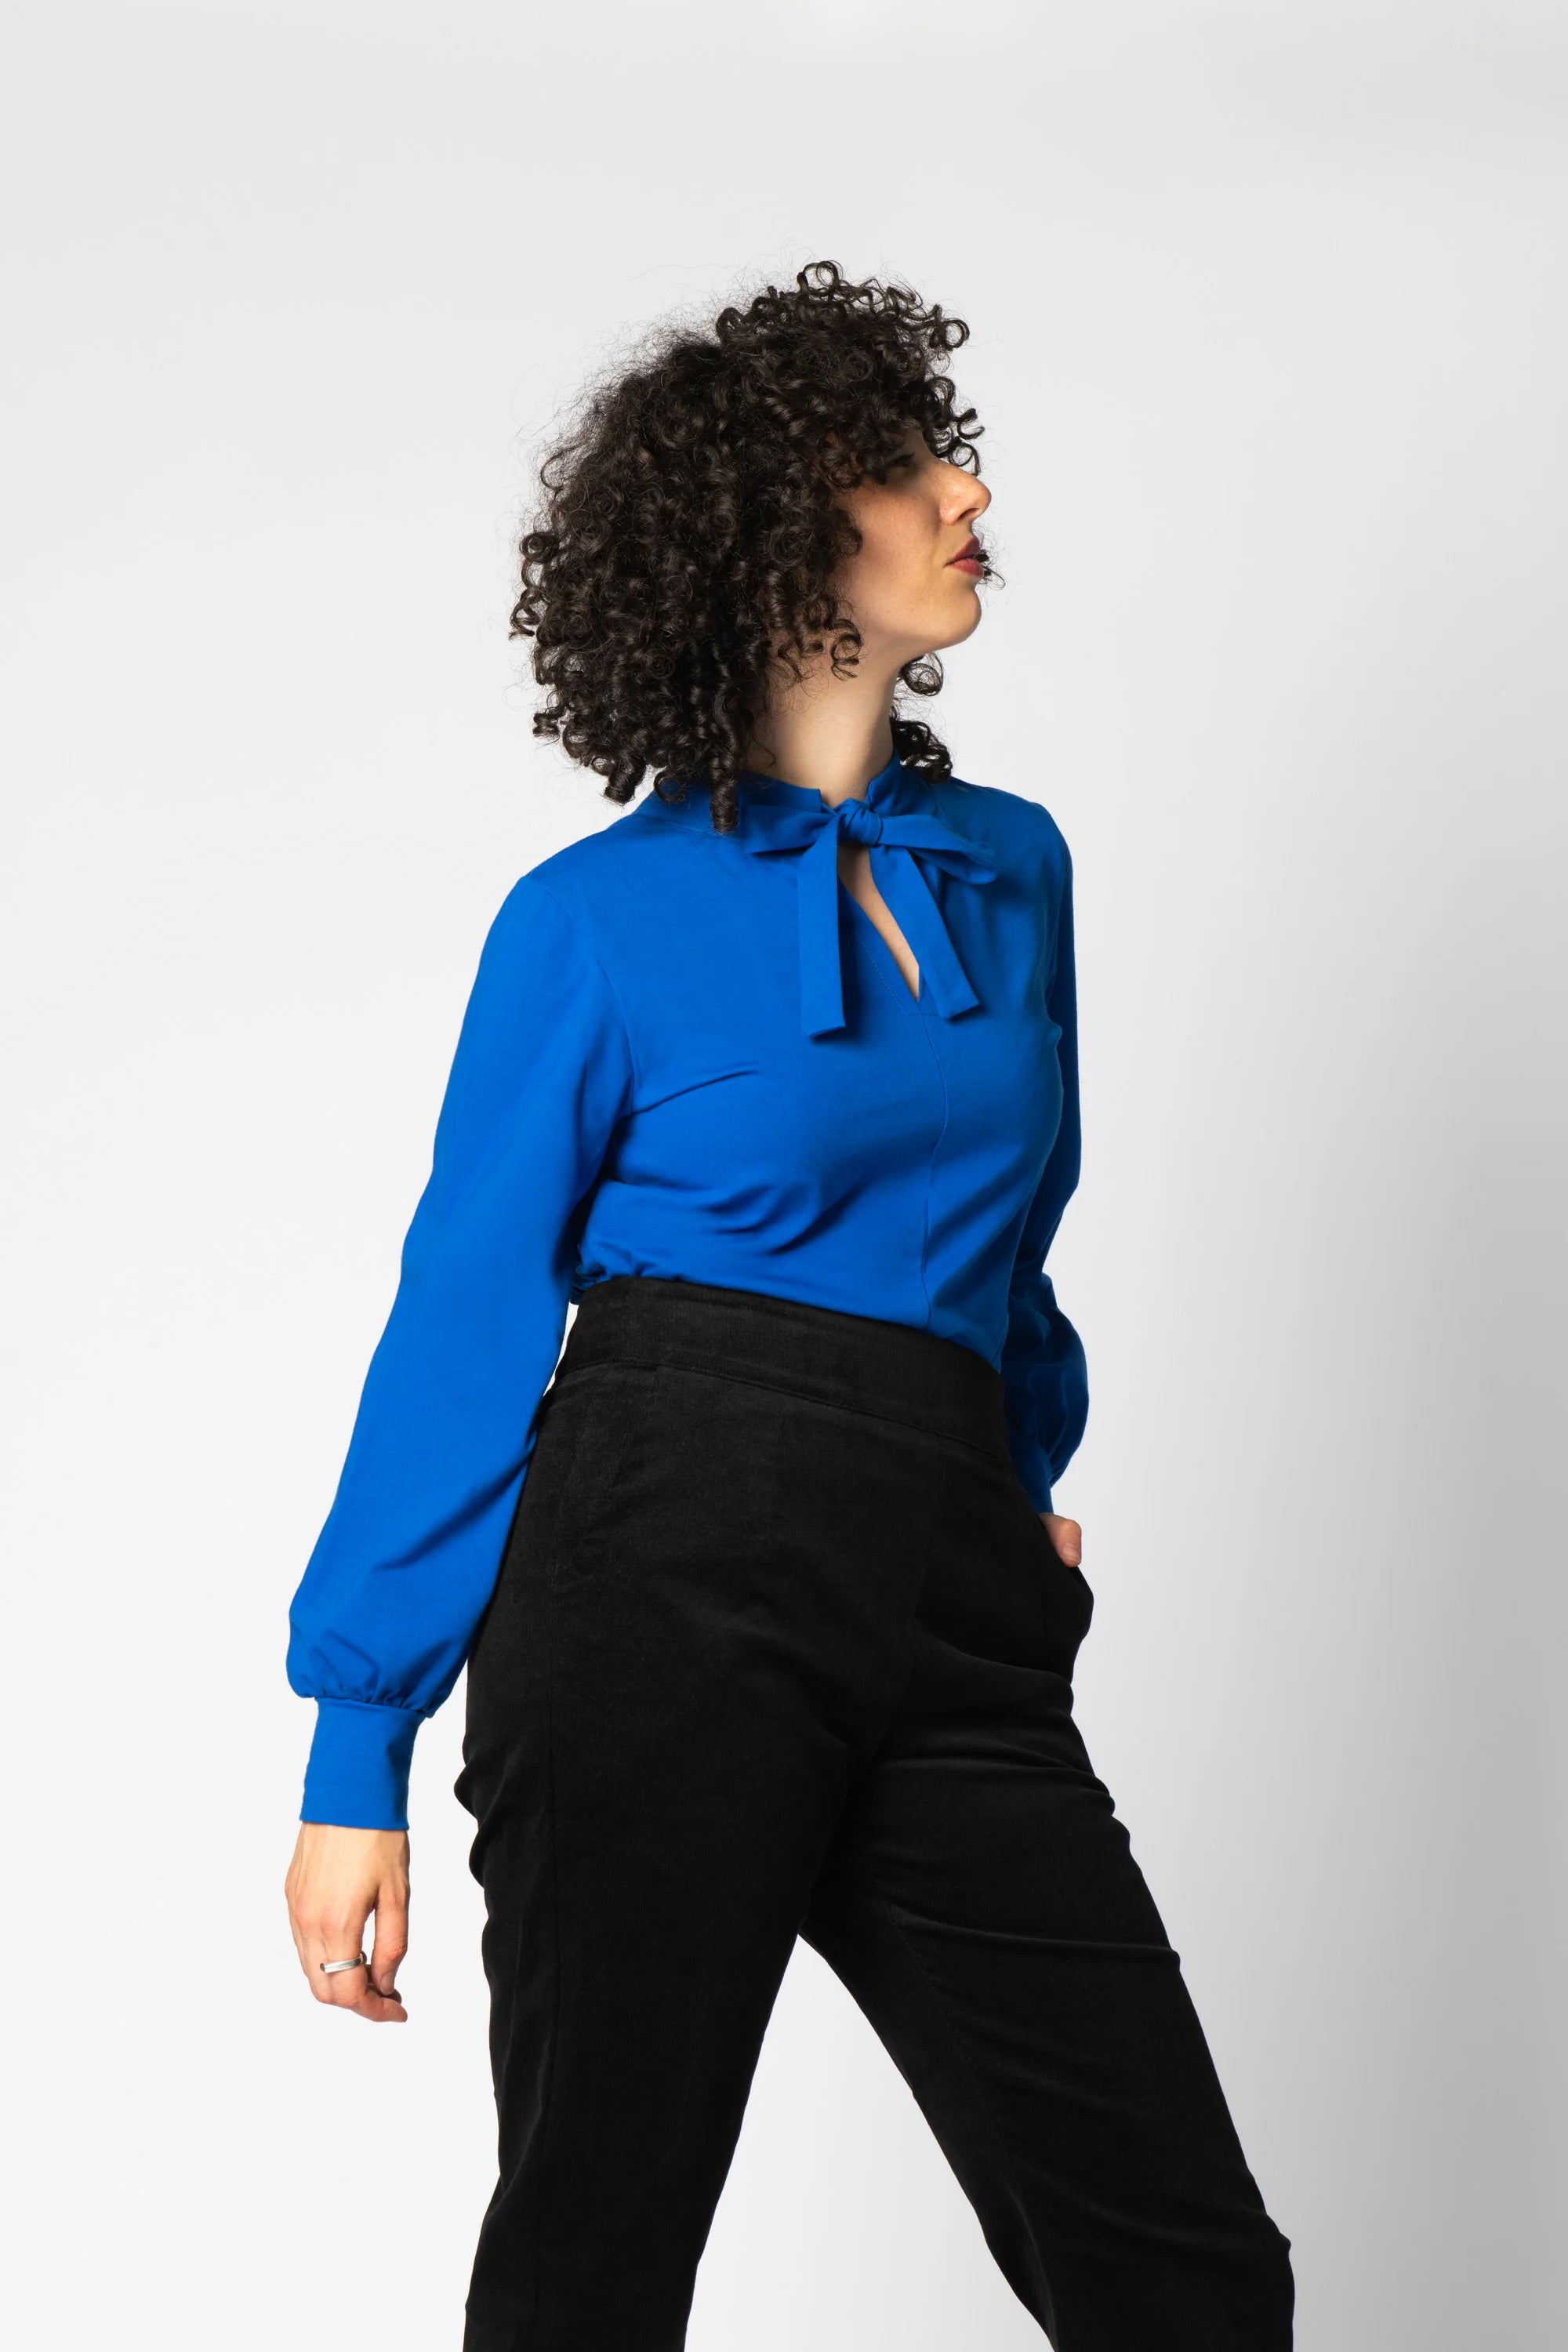 Sarandon Reversible Top by Eve Lavoie, Royal Cotton, high neck on one side, tie neck with opening on other side, puffed sleeves, full-length sleeves, eco-fabric, OEKO-TEX certified cotton, sizes XS to XL, made in Montreal